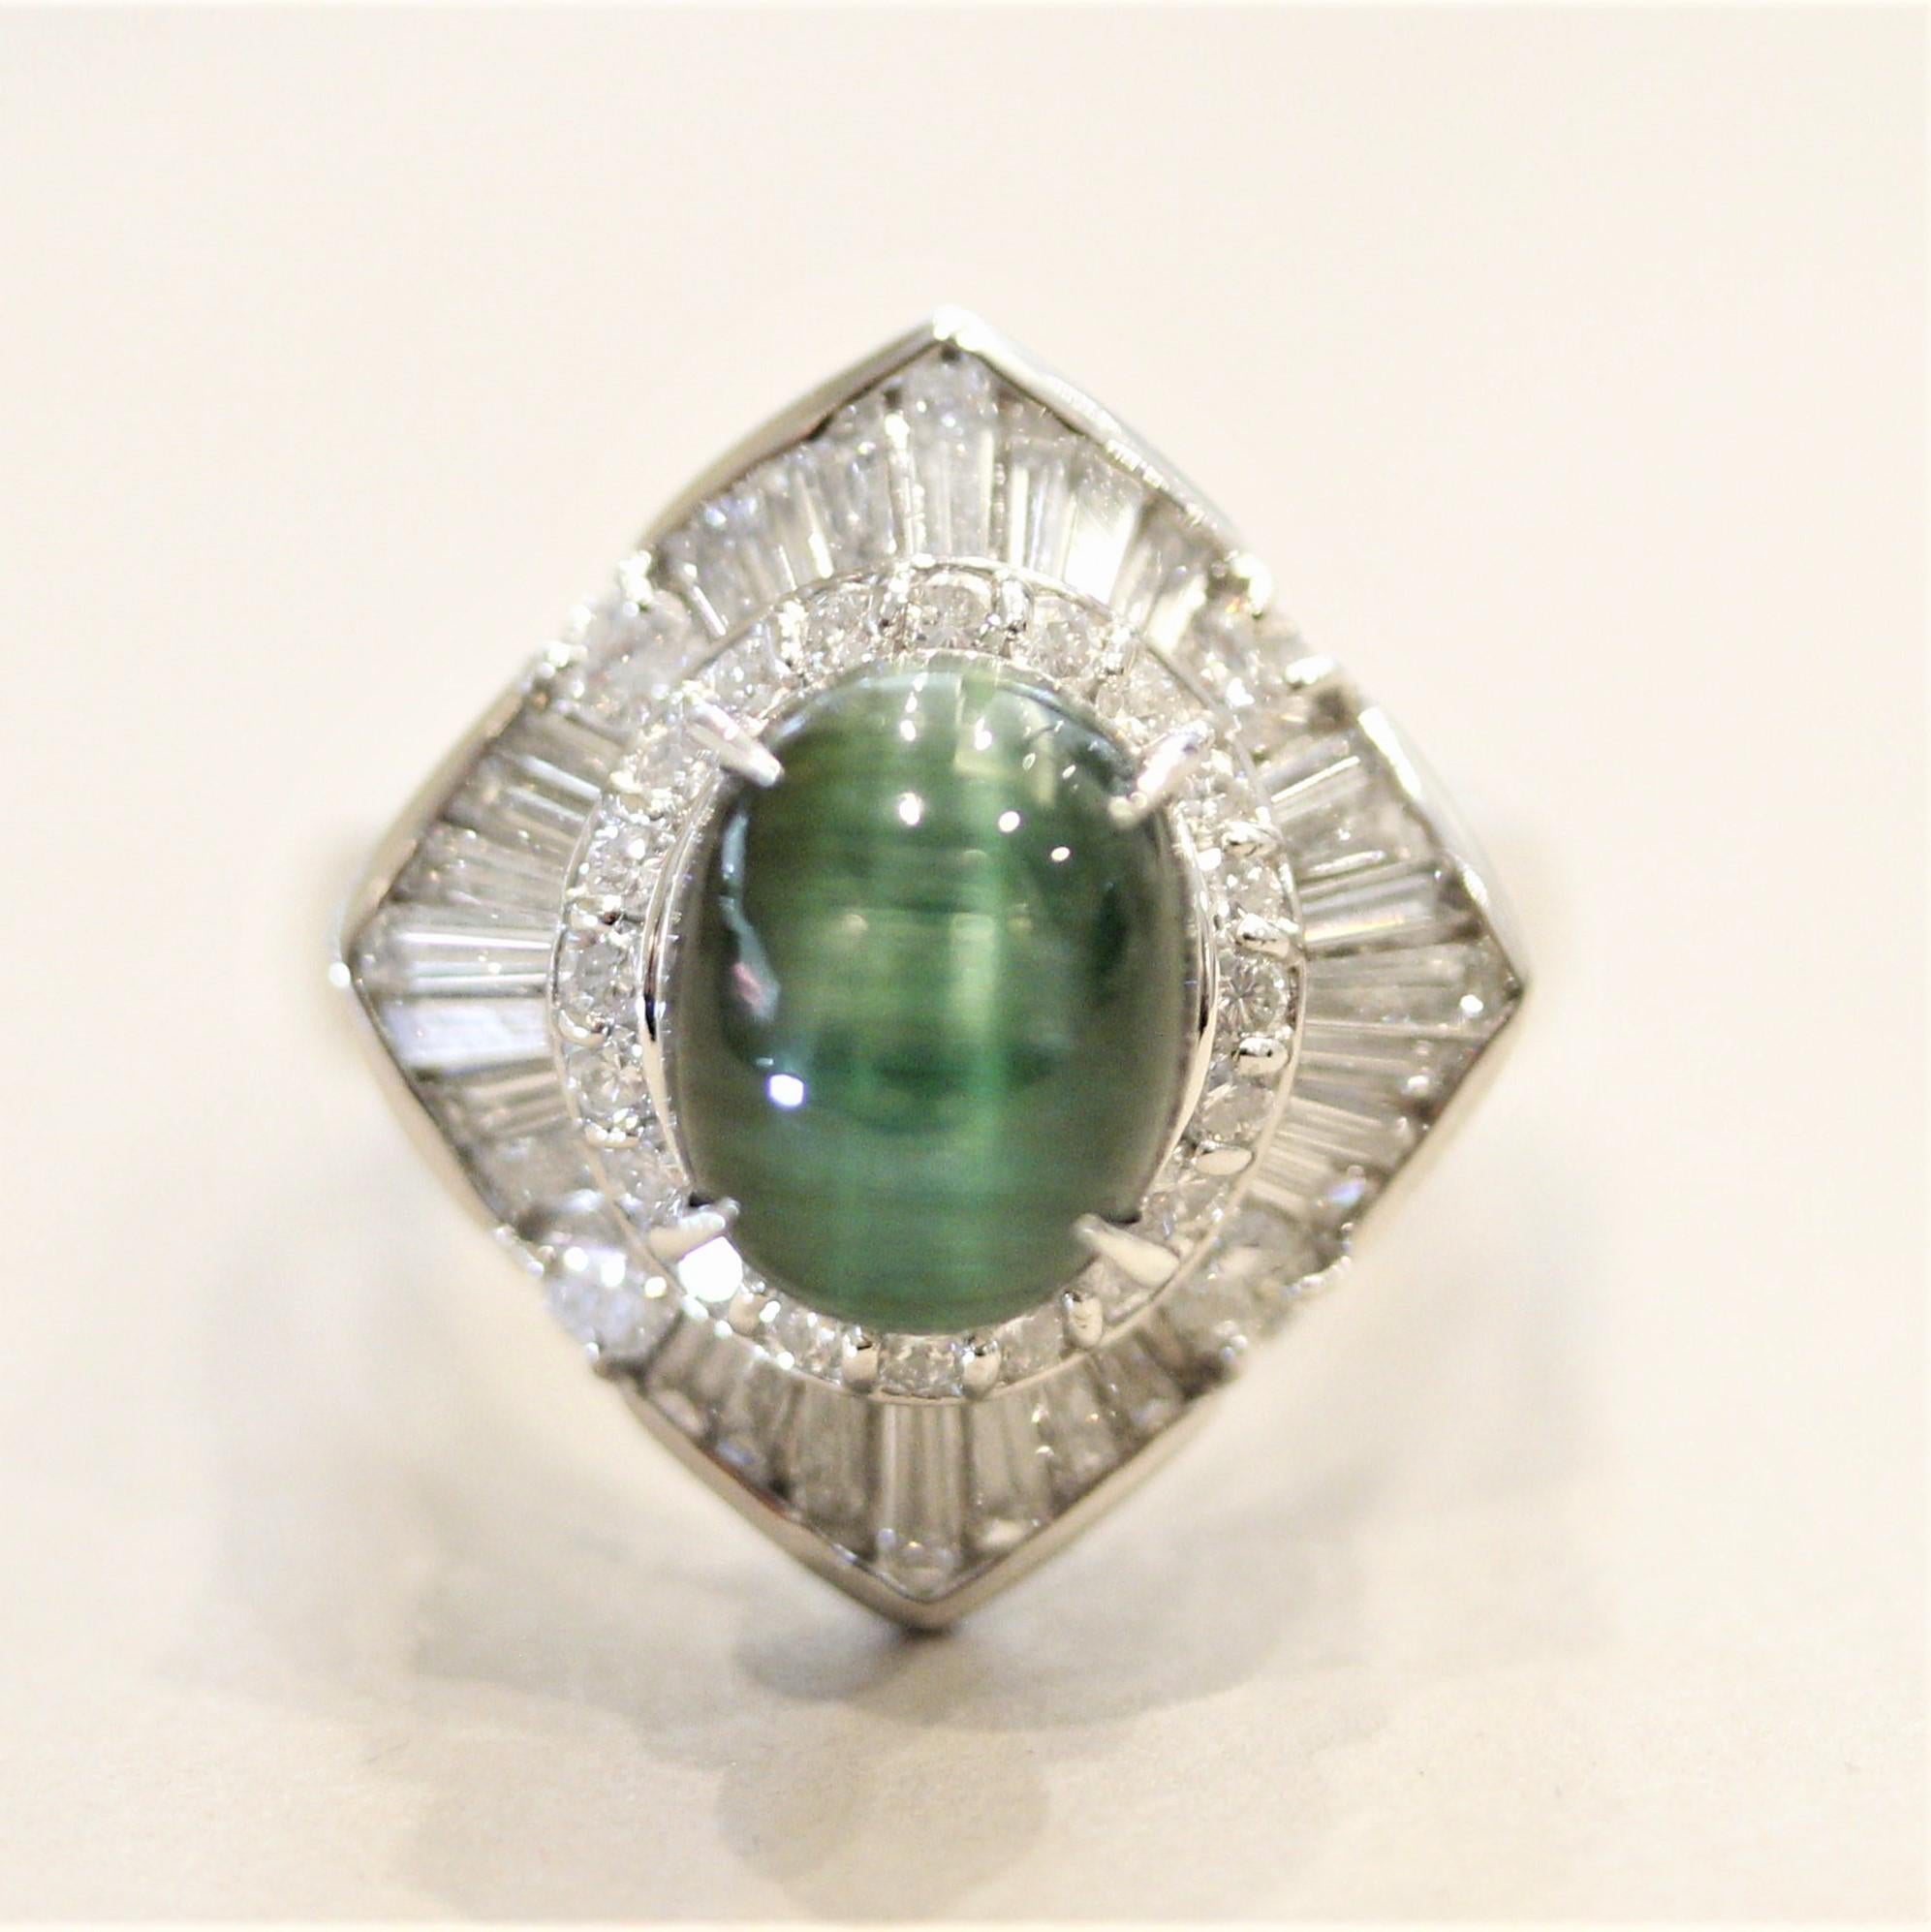 A unique tourmaline with chatoyancy aka cat’s eye effect! The 3.80 carat green tourmaline has an eye running down the stone and moves along with the light. It is accented by 1.45 carats of round brilliant-cut and baguette-cut diamonds set around the